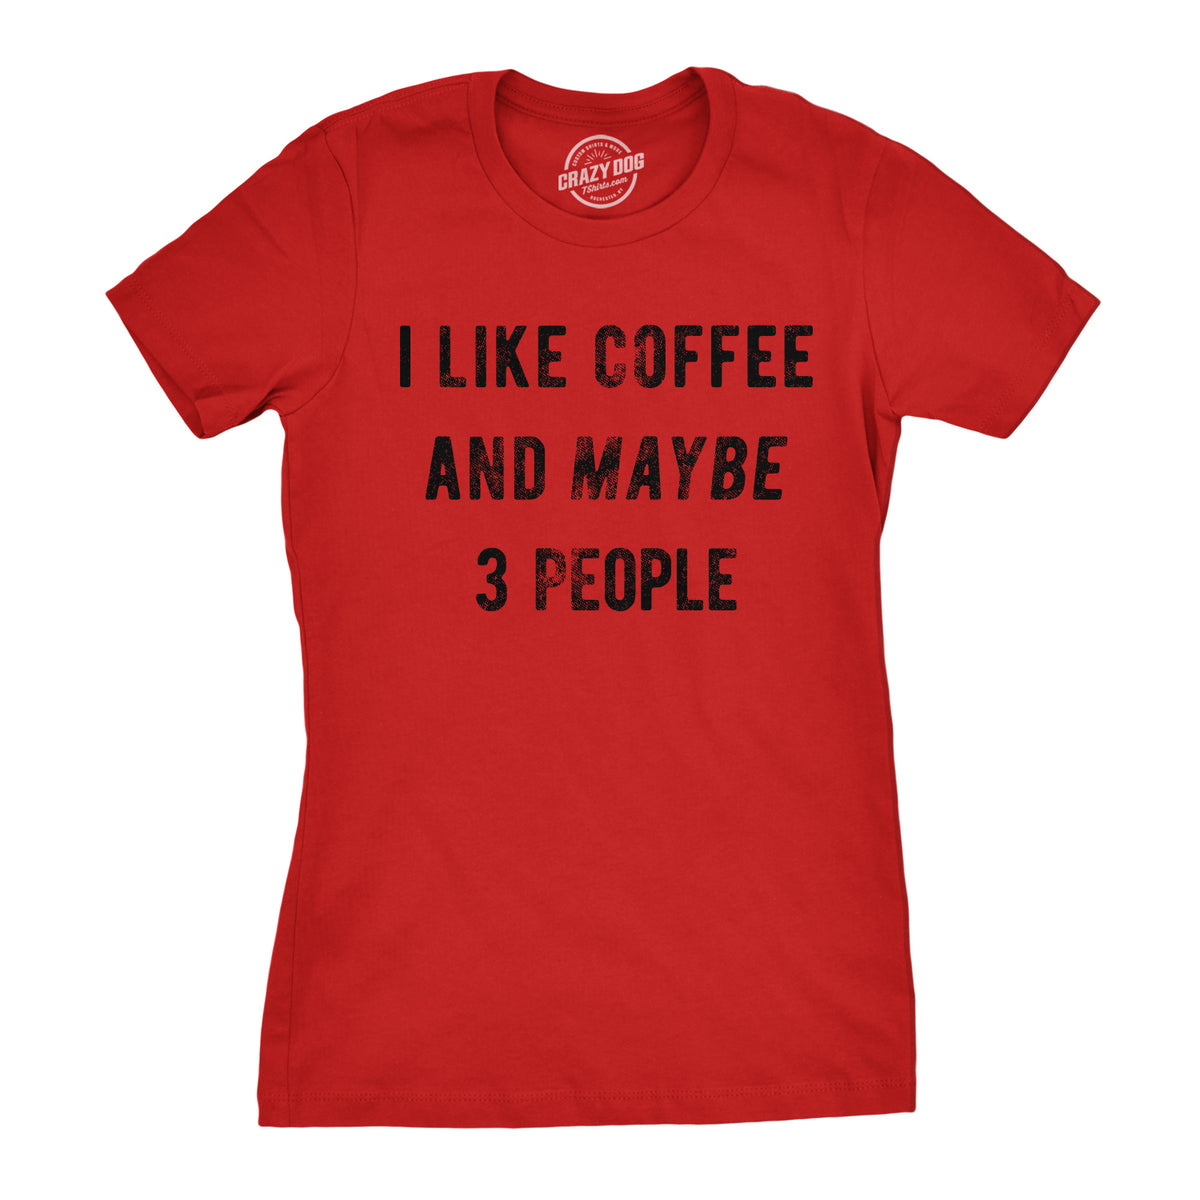 Funny Red I Like Coffee And Maybe 3 People Womens T Shirt Nerdy Coffee Tee